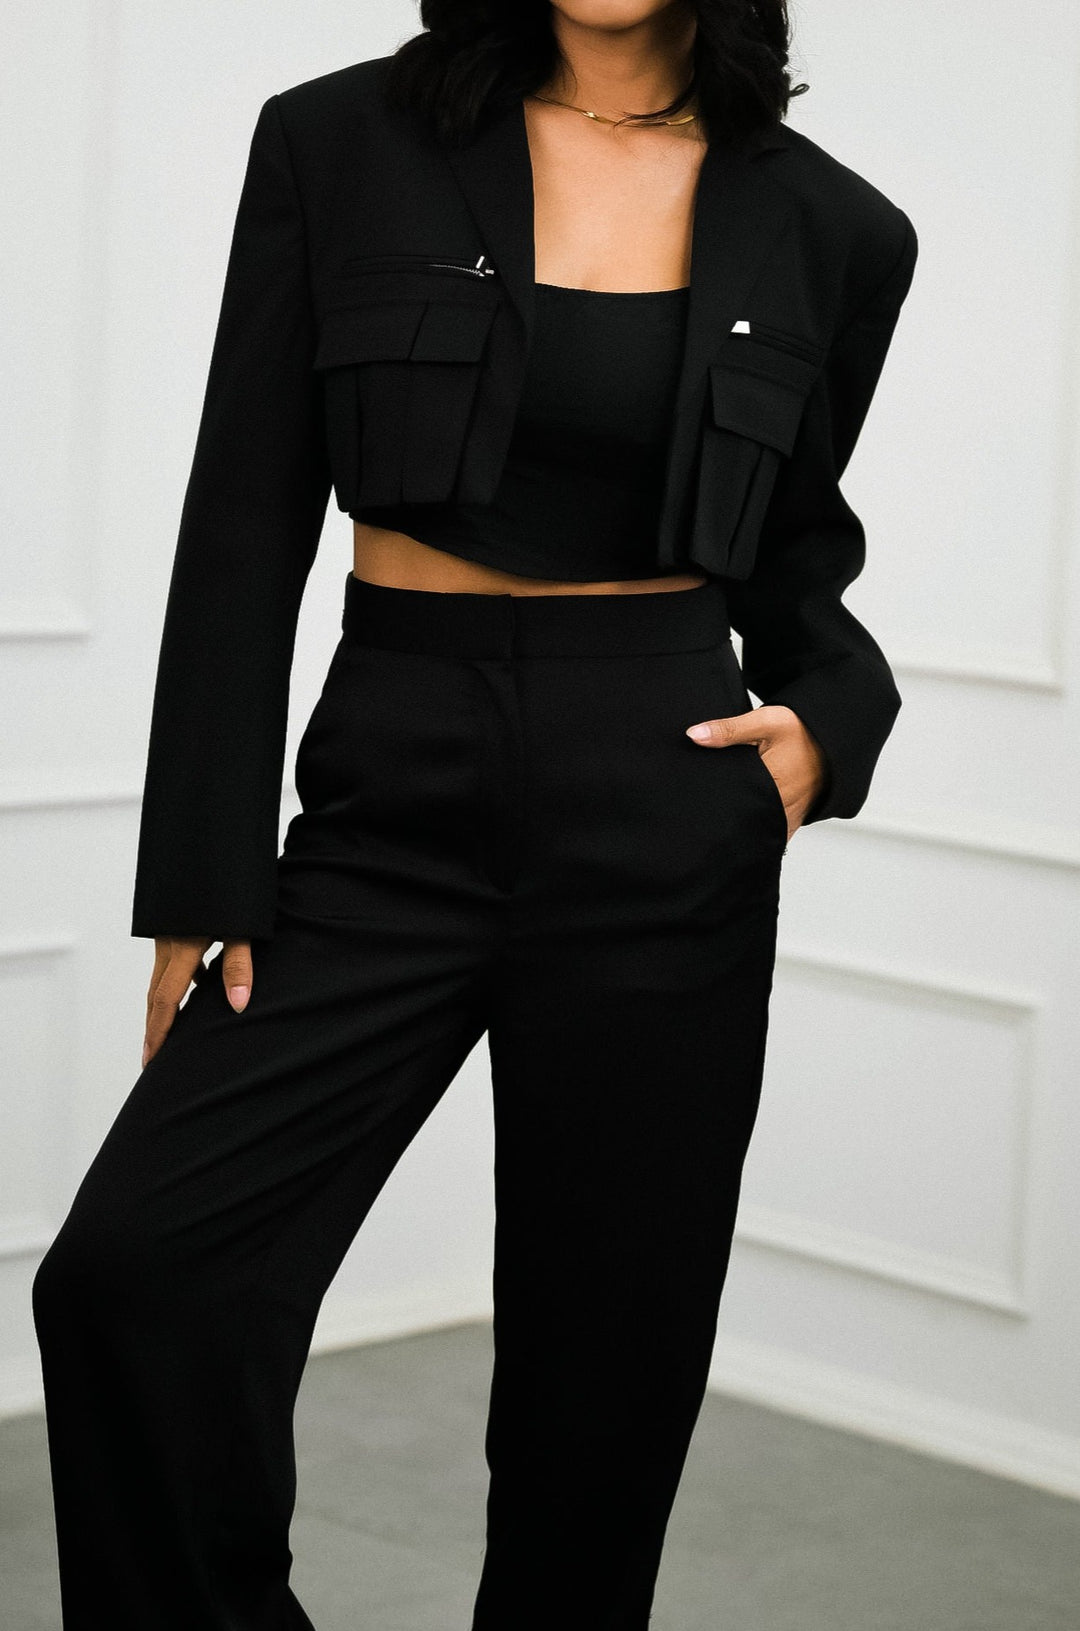 Carbon Streetwear Chic A stylish cropped blazer for a bold and trendy street swagger look